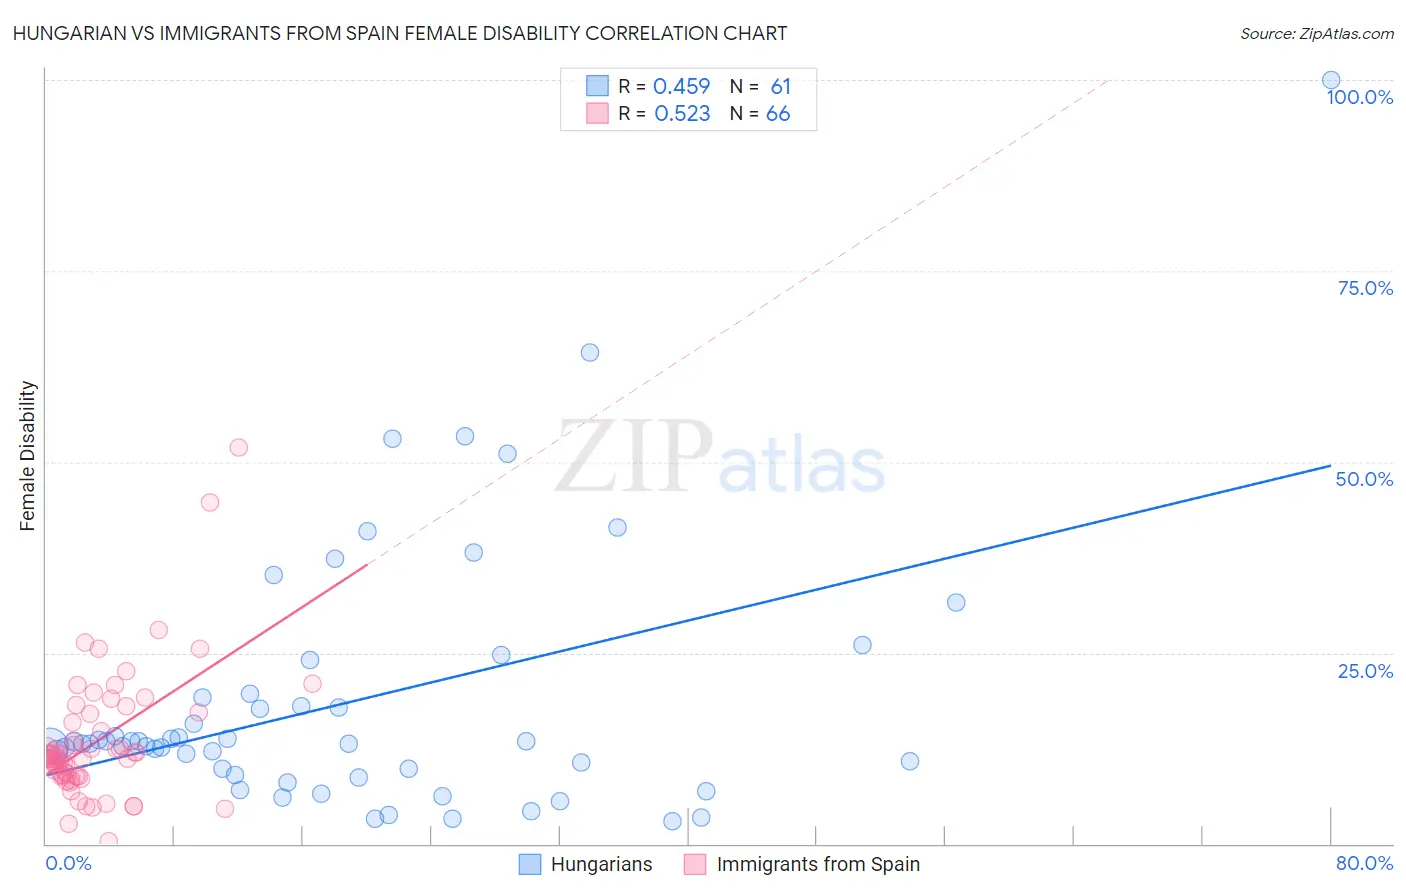 Hungarian vs Immigrants from Spain Female Disability